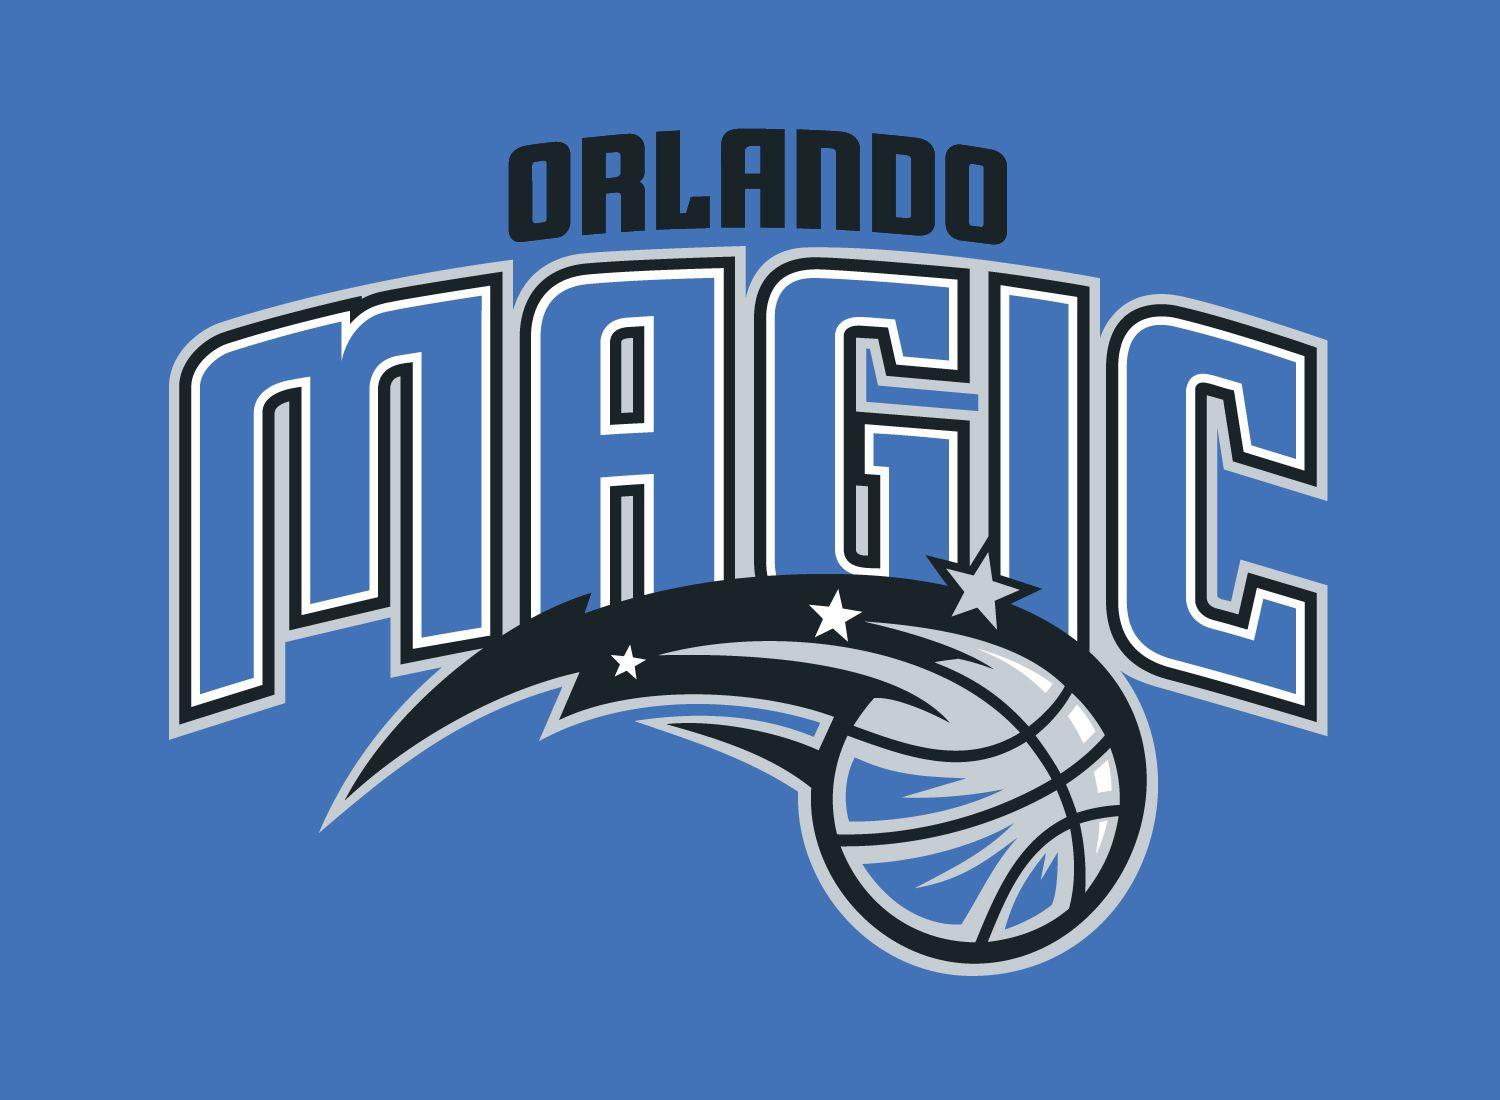 Magic Logo - Orlando Magic Logo, Orlando Magic Symbol, Meaning, History and Evolution